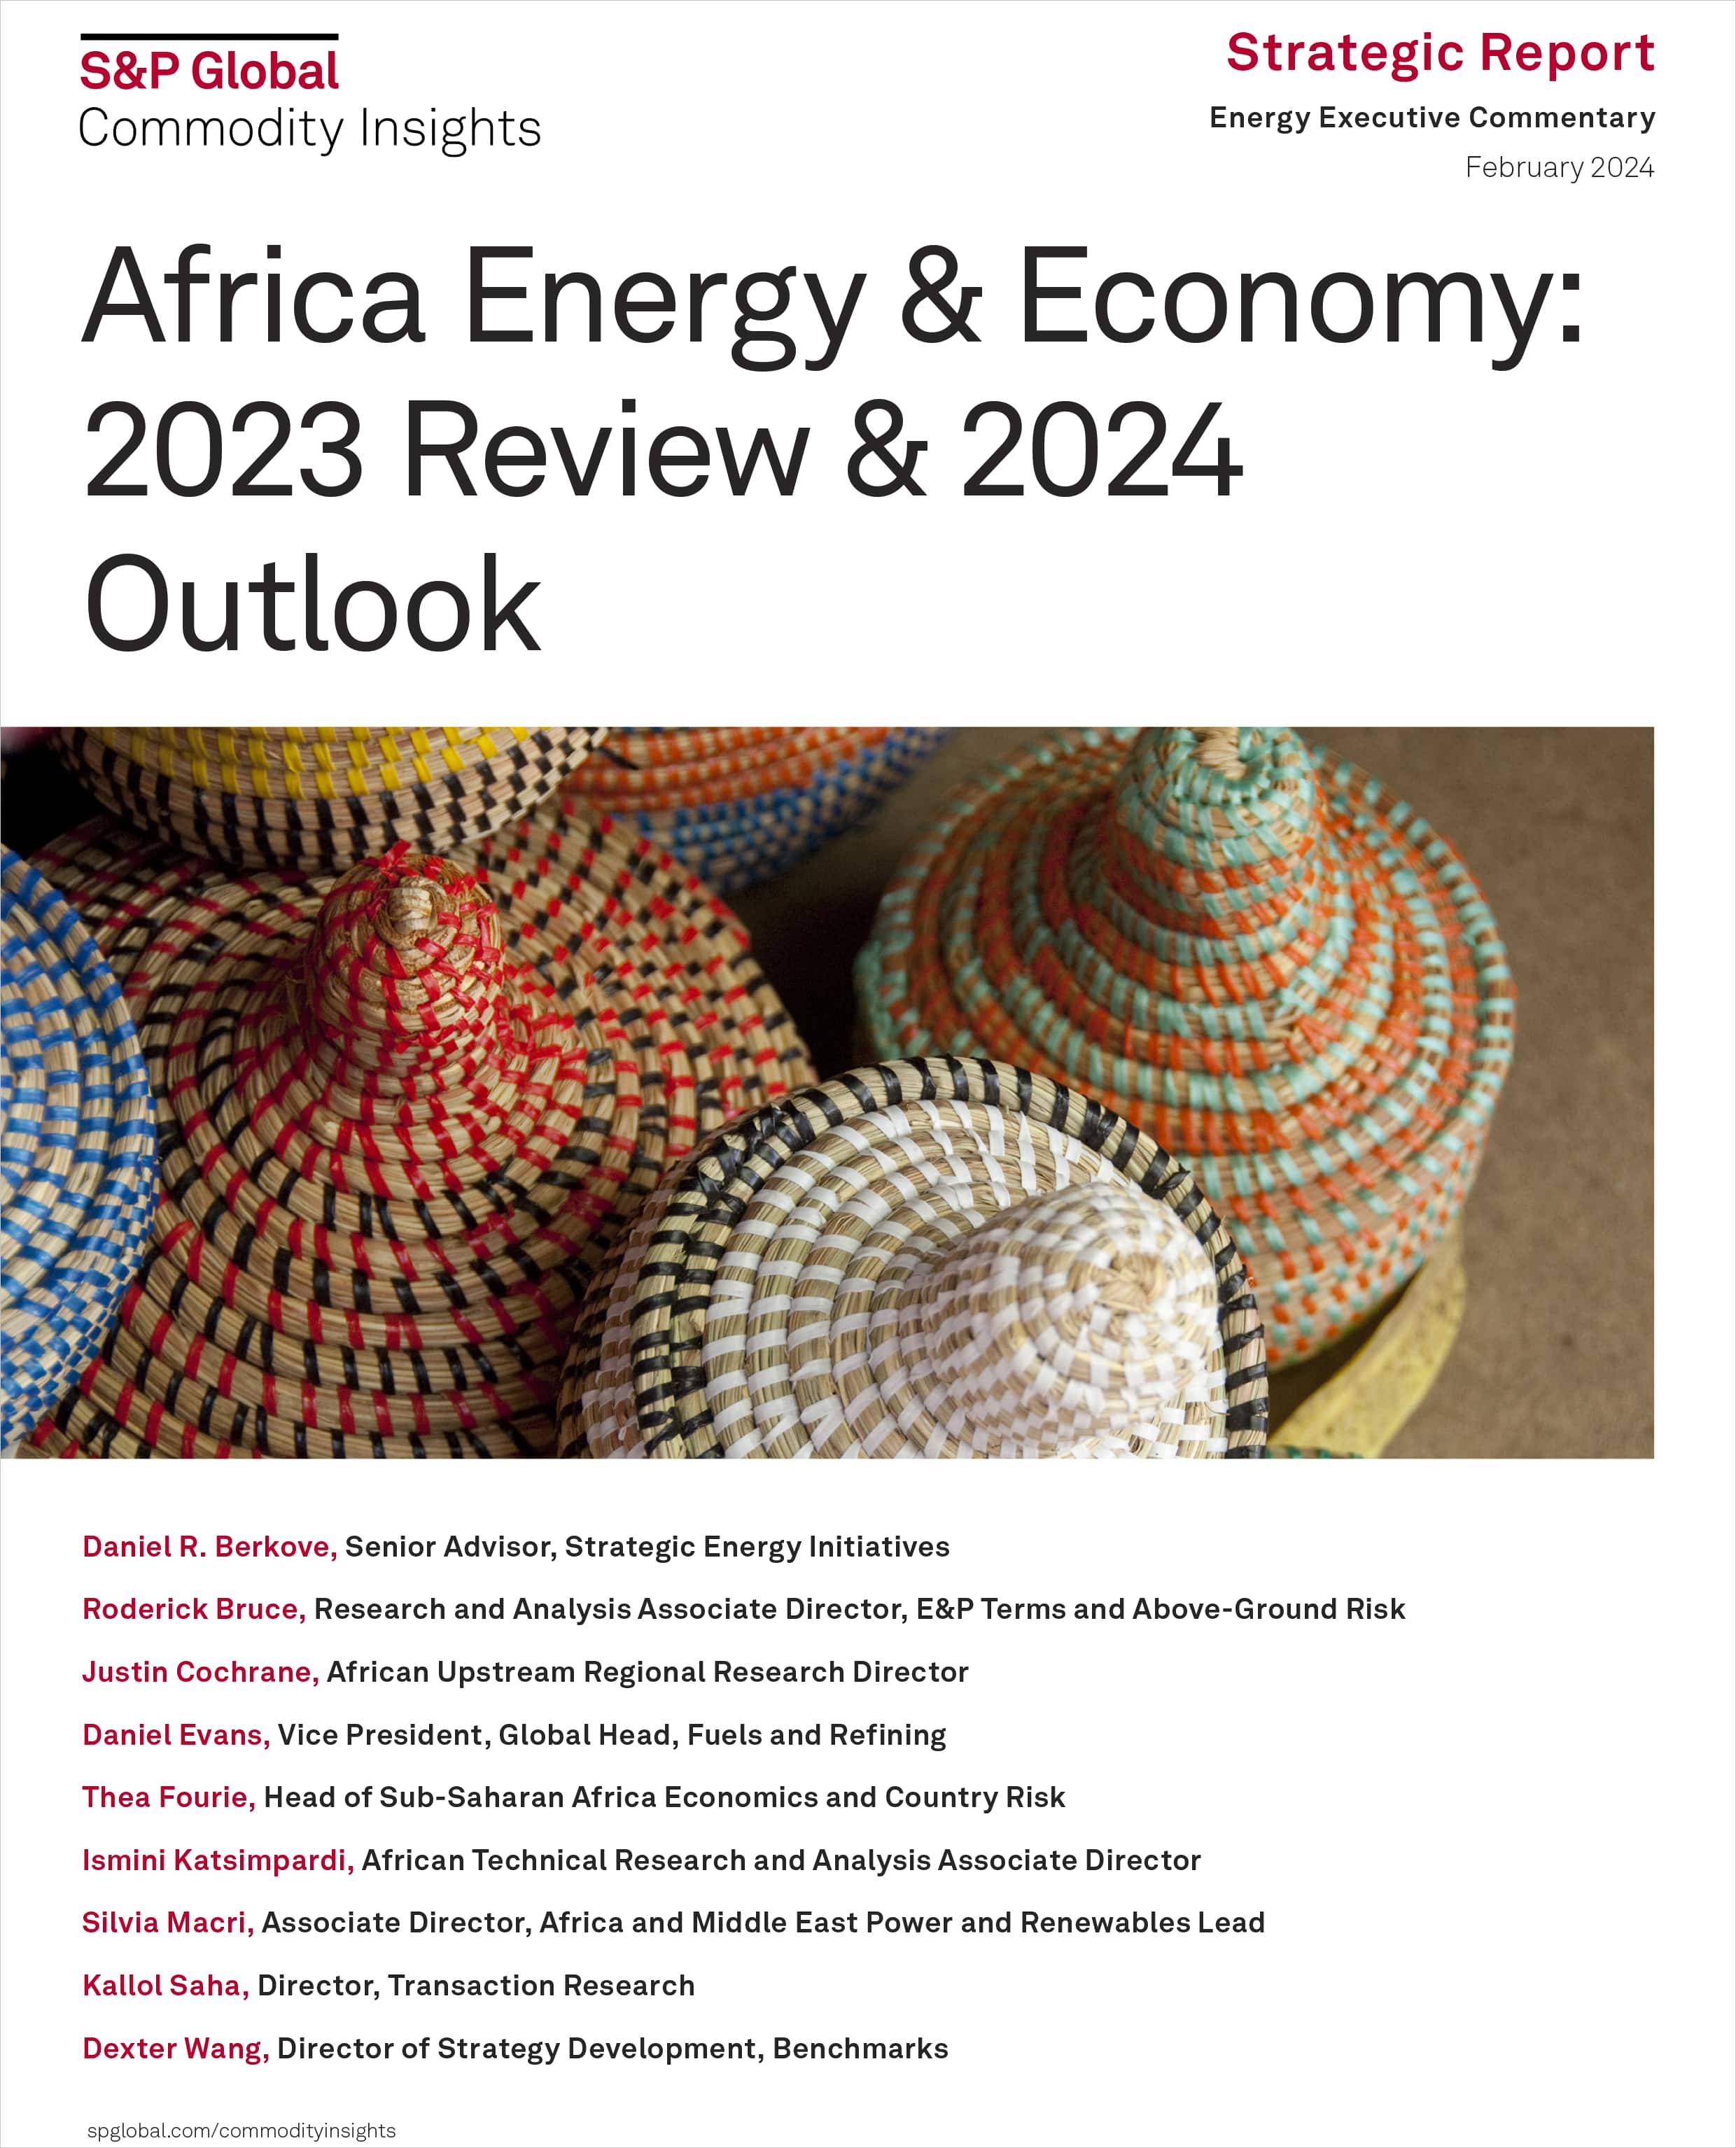 Africa Energy and Economy: 2023 Review and 2024 Outlook